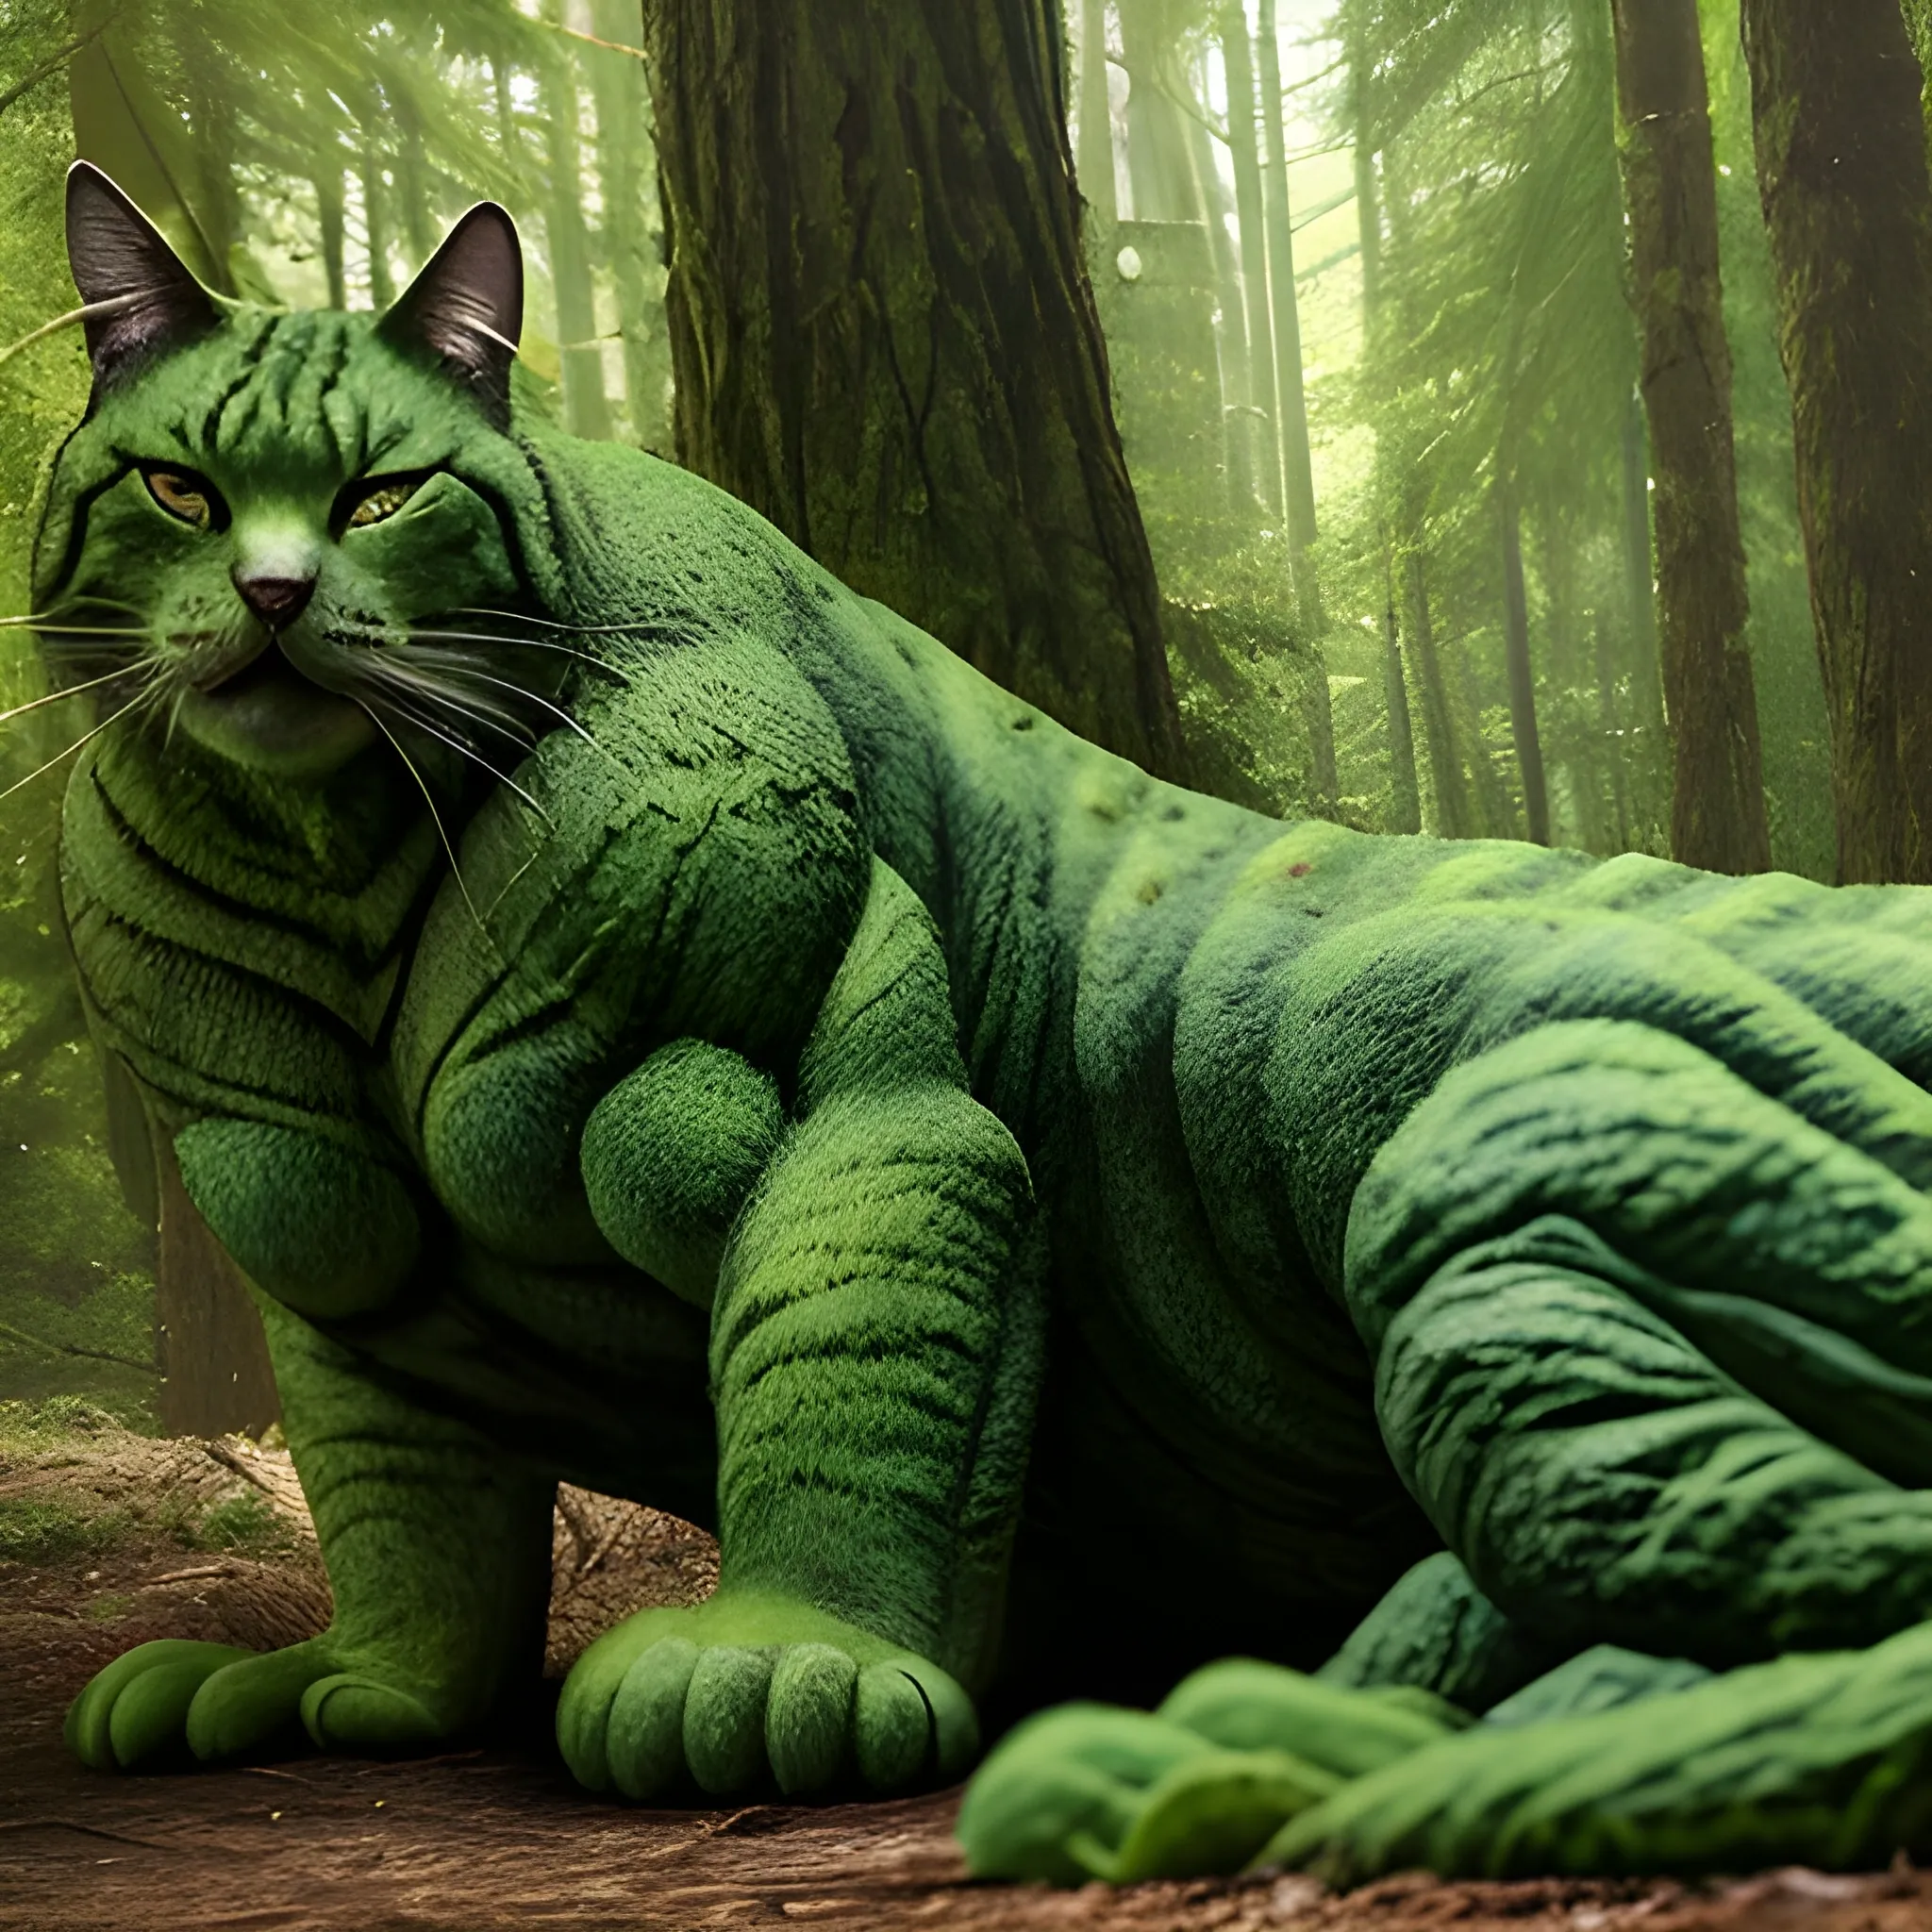 In the sunny forest, there is a very tall and strong "green cat" with very developed muscles. Godzilla is  lying on the ground with wounds all over his body. Surreal photos and ultra-real details.